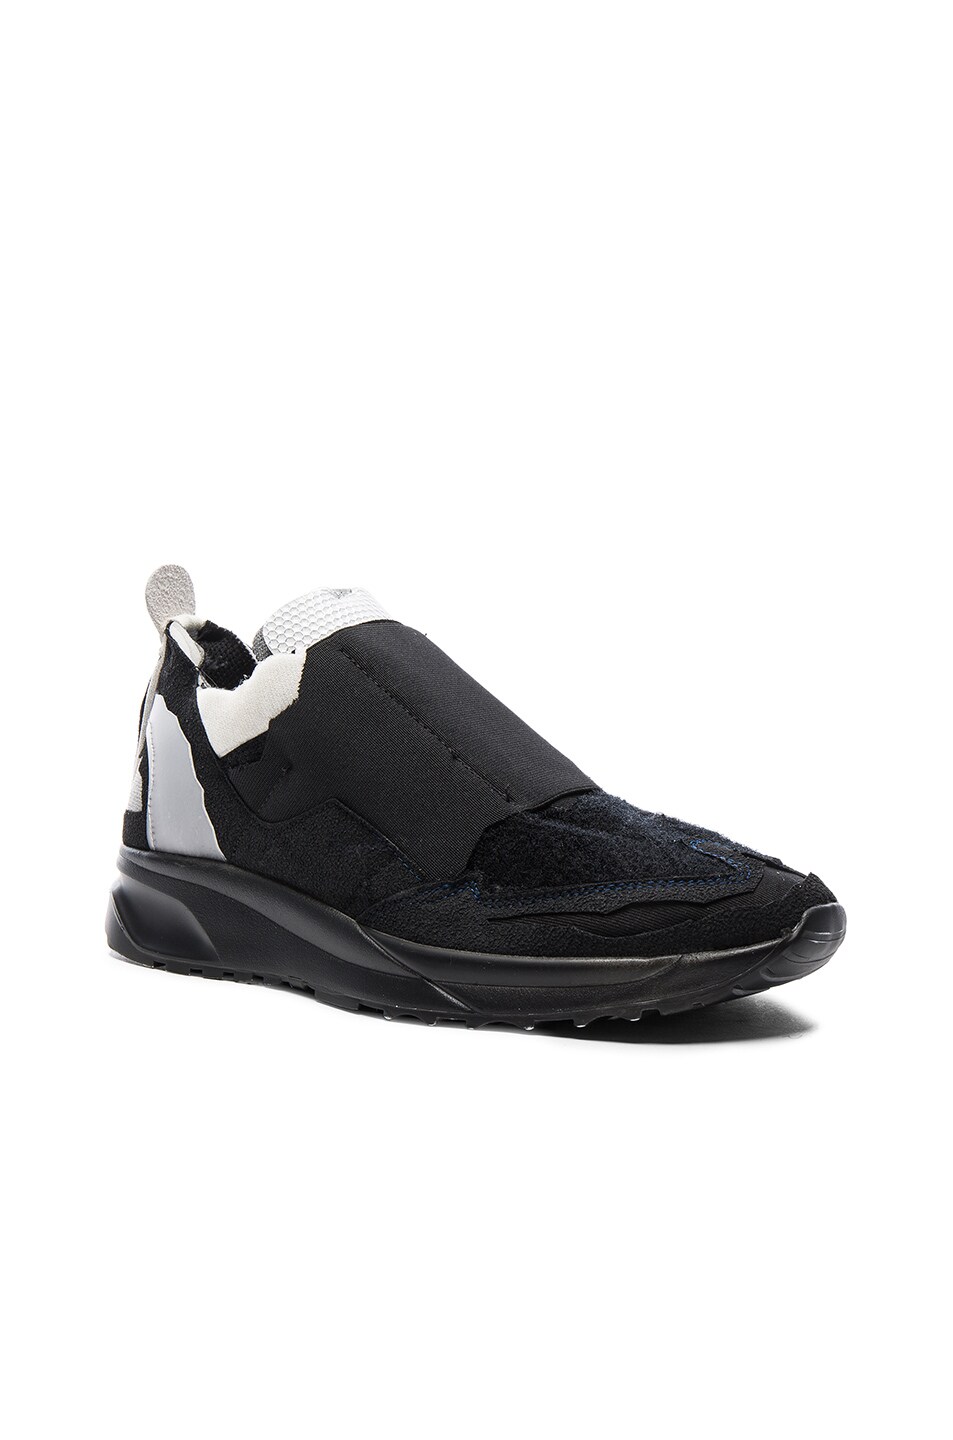 Image 1 of Maison Margiela Deconstructed Sneakers in Black & White